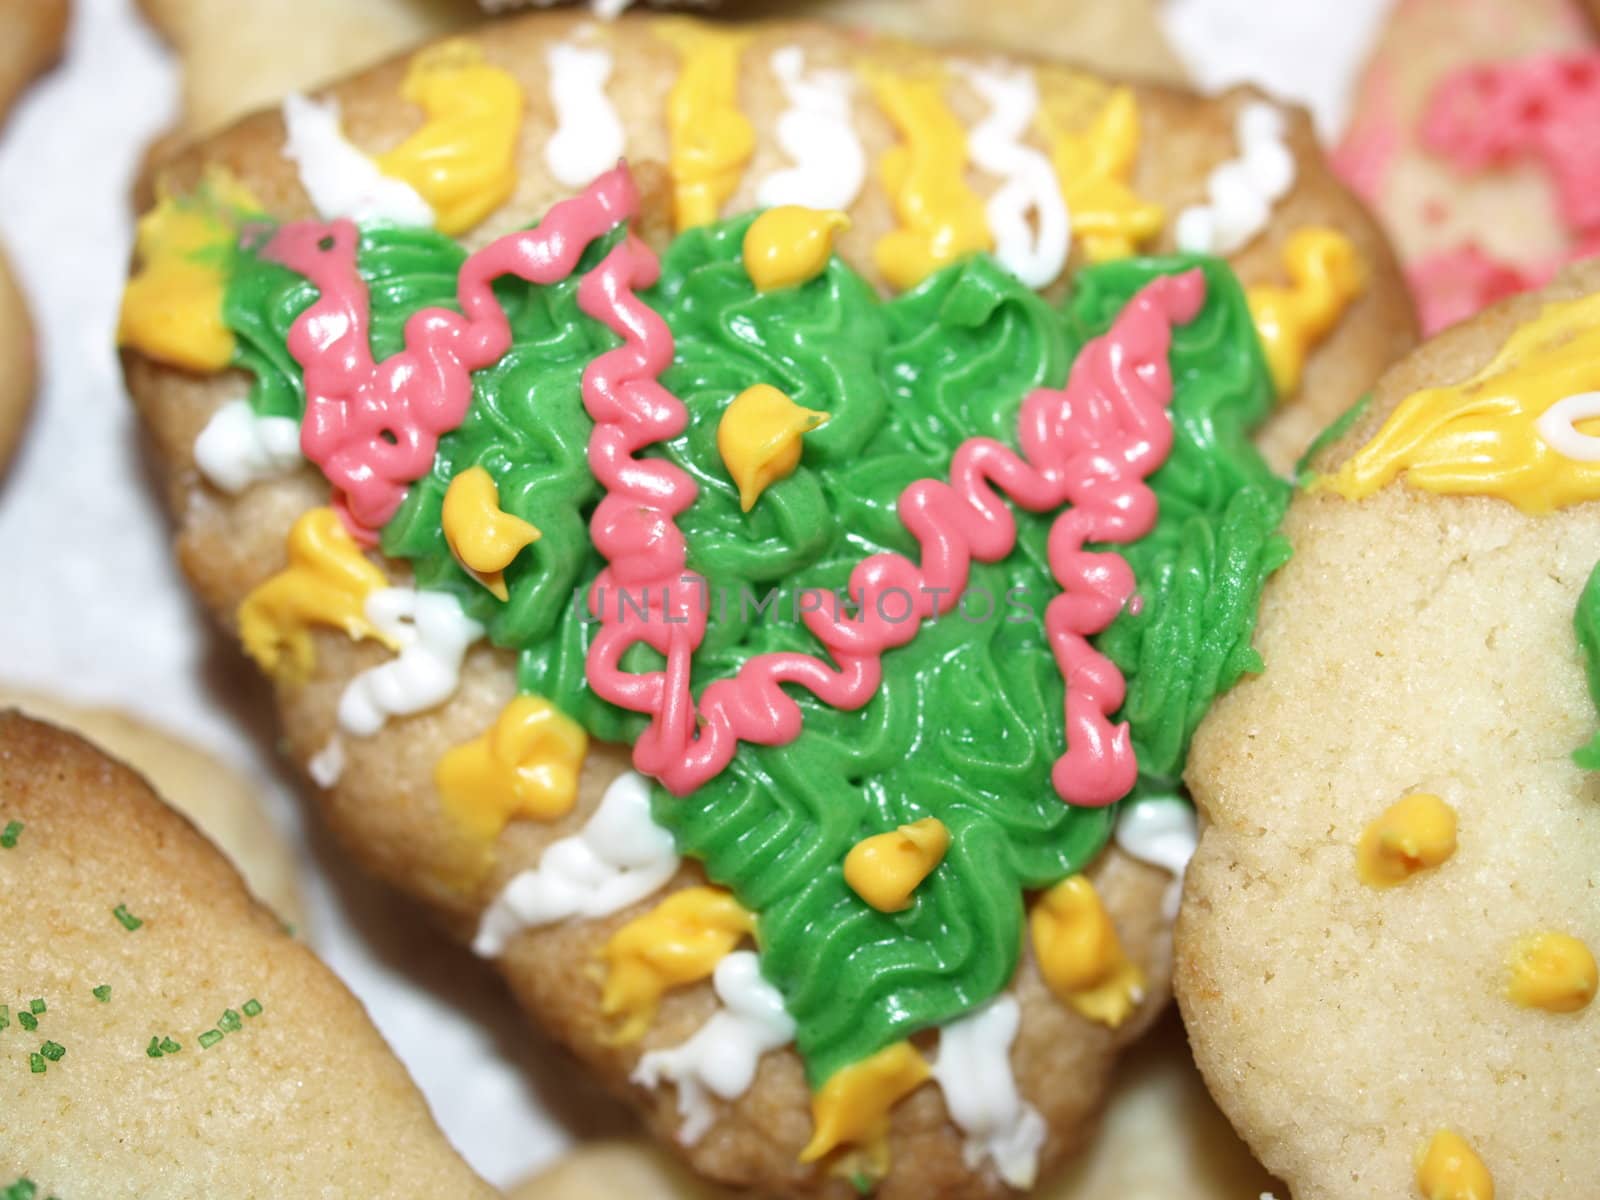 A plate of decorated christmas cookies